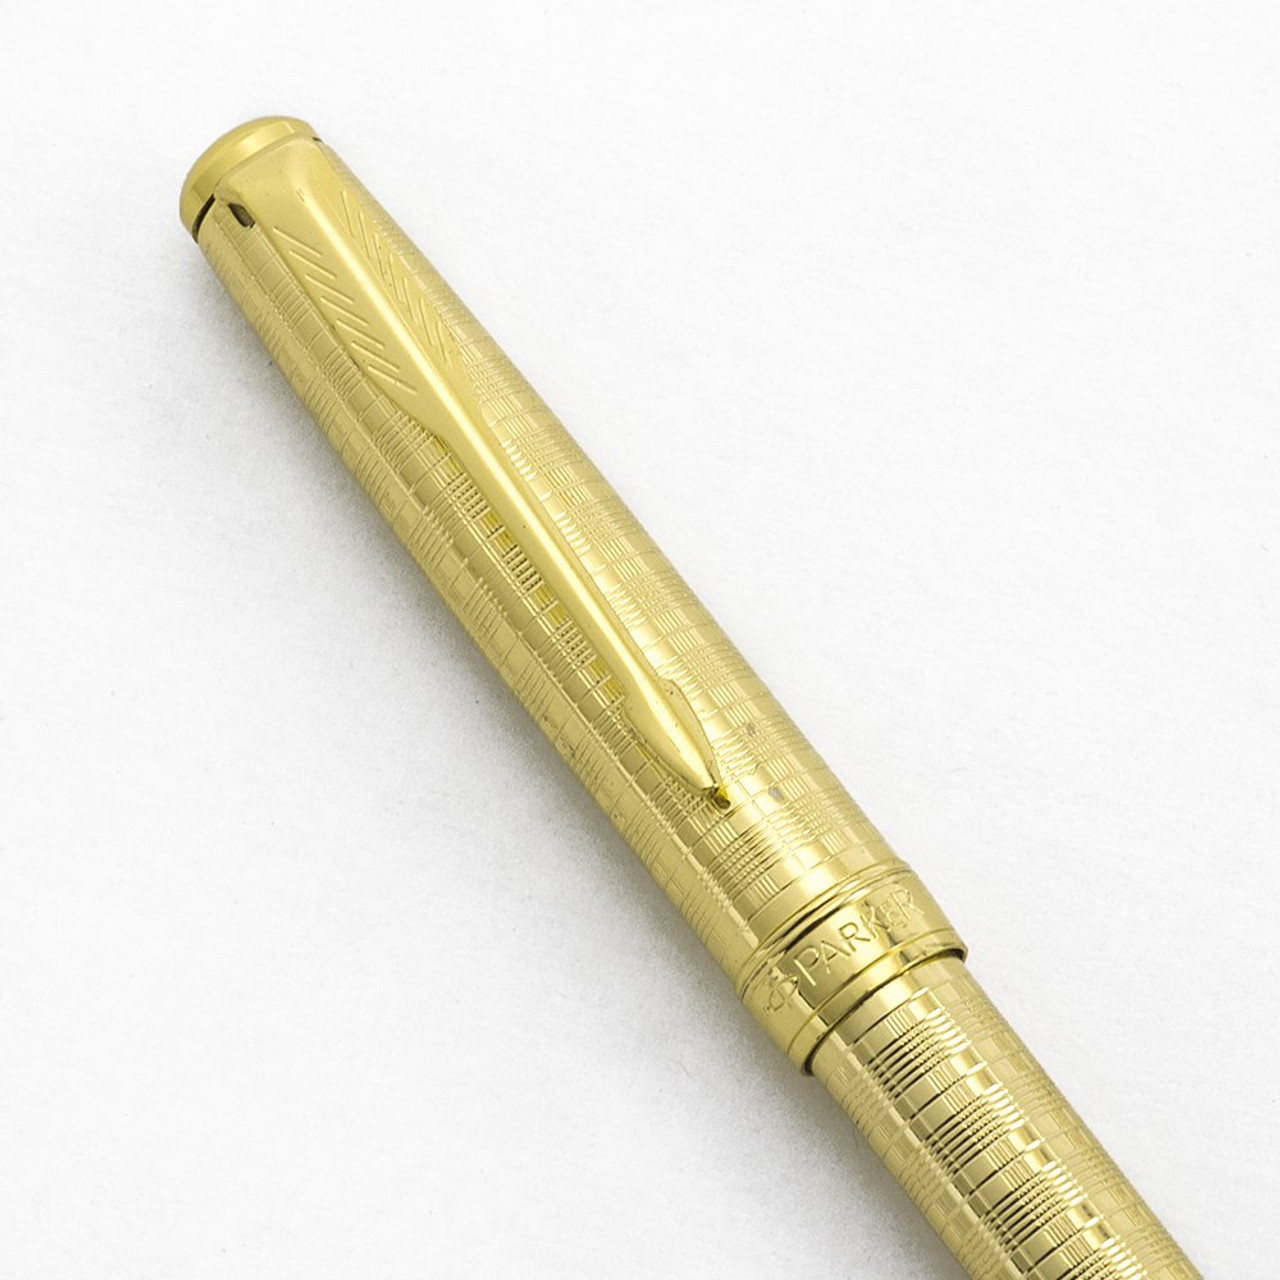 Parker Sonnet Ballpoint Pen (2010) - Gold Plated Chiselled Tartan, Gold Plated Trim (Excellent +, Works Well)